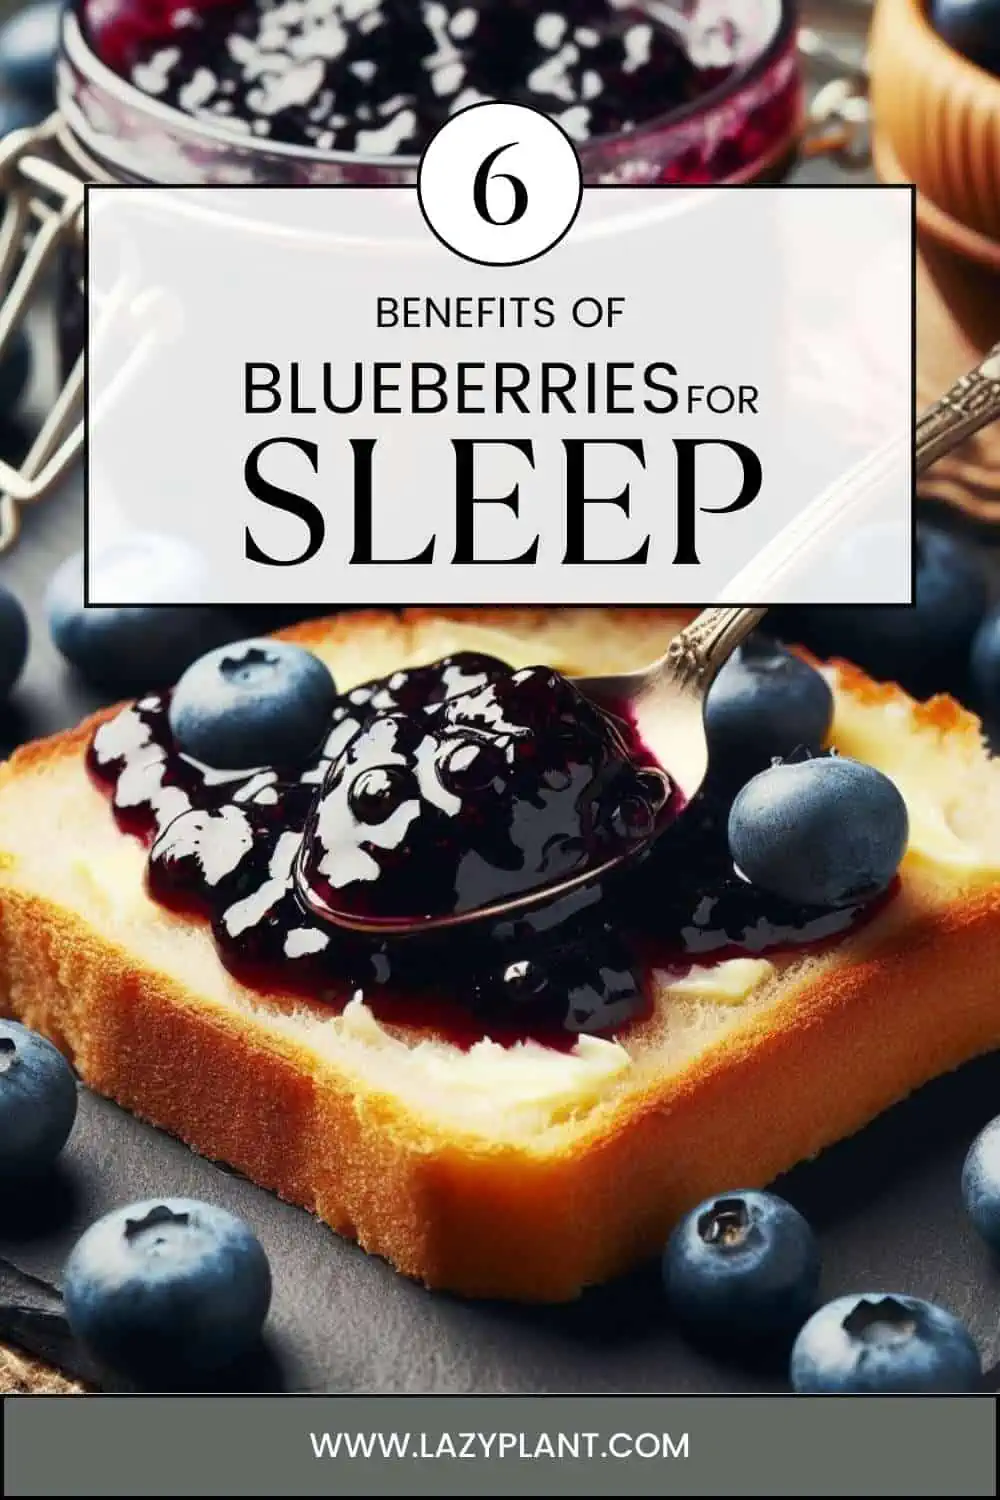 A bedtime snack of raw blueberries can contribute to a good night's sleep.